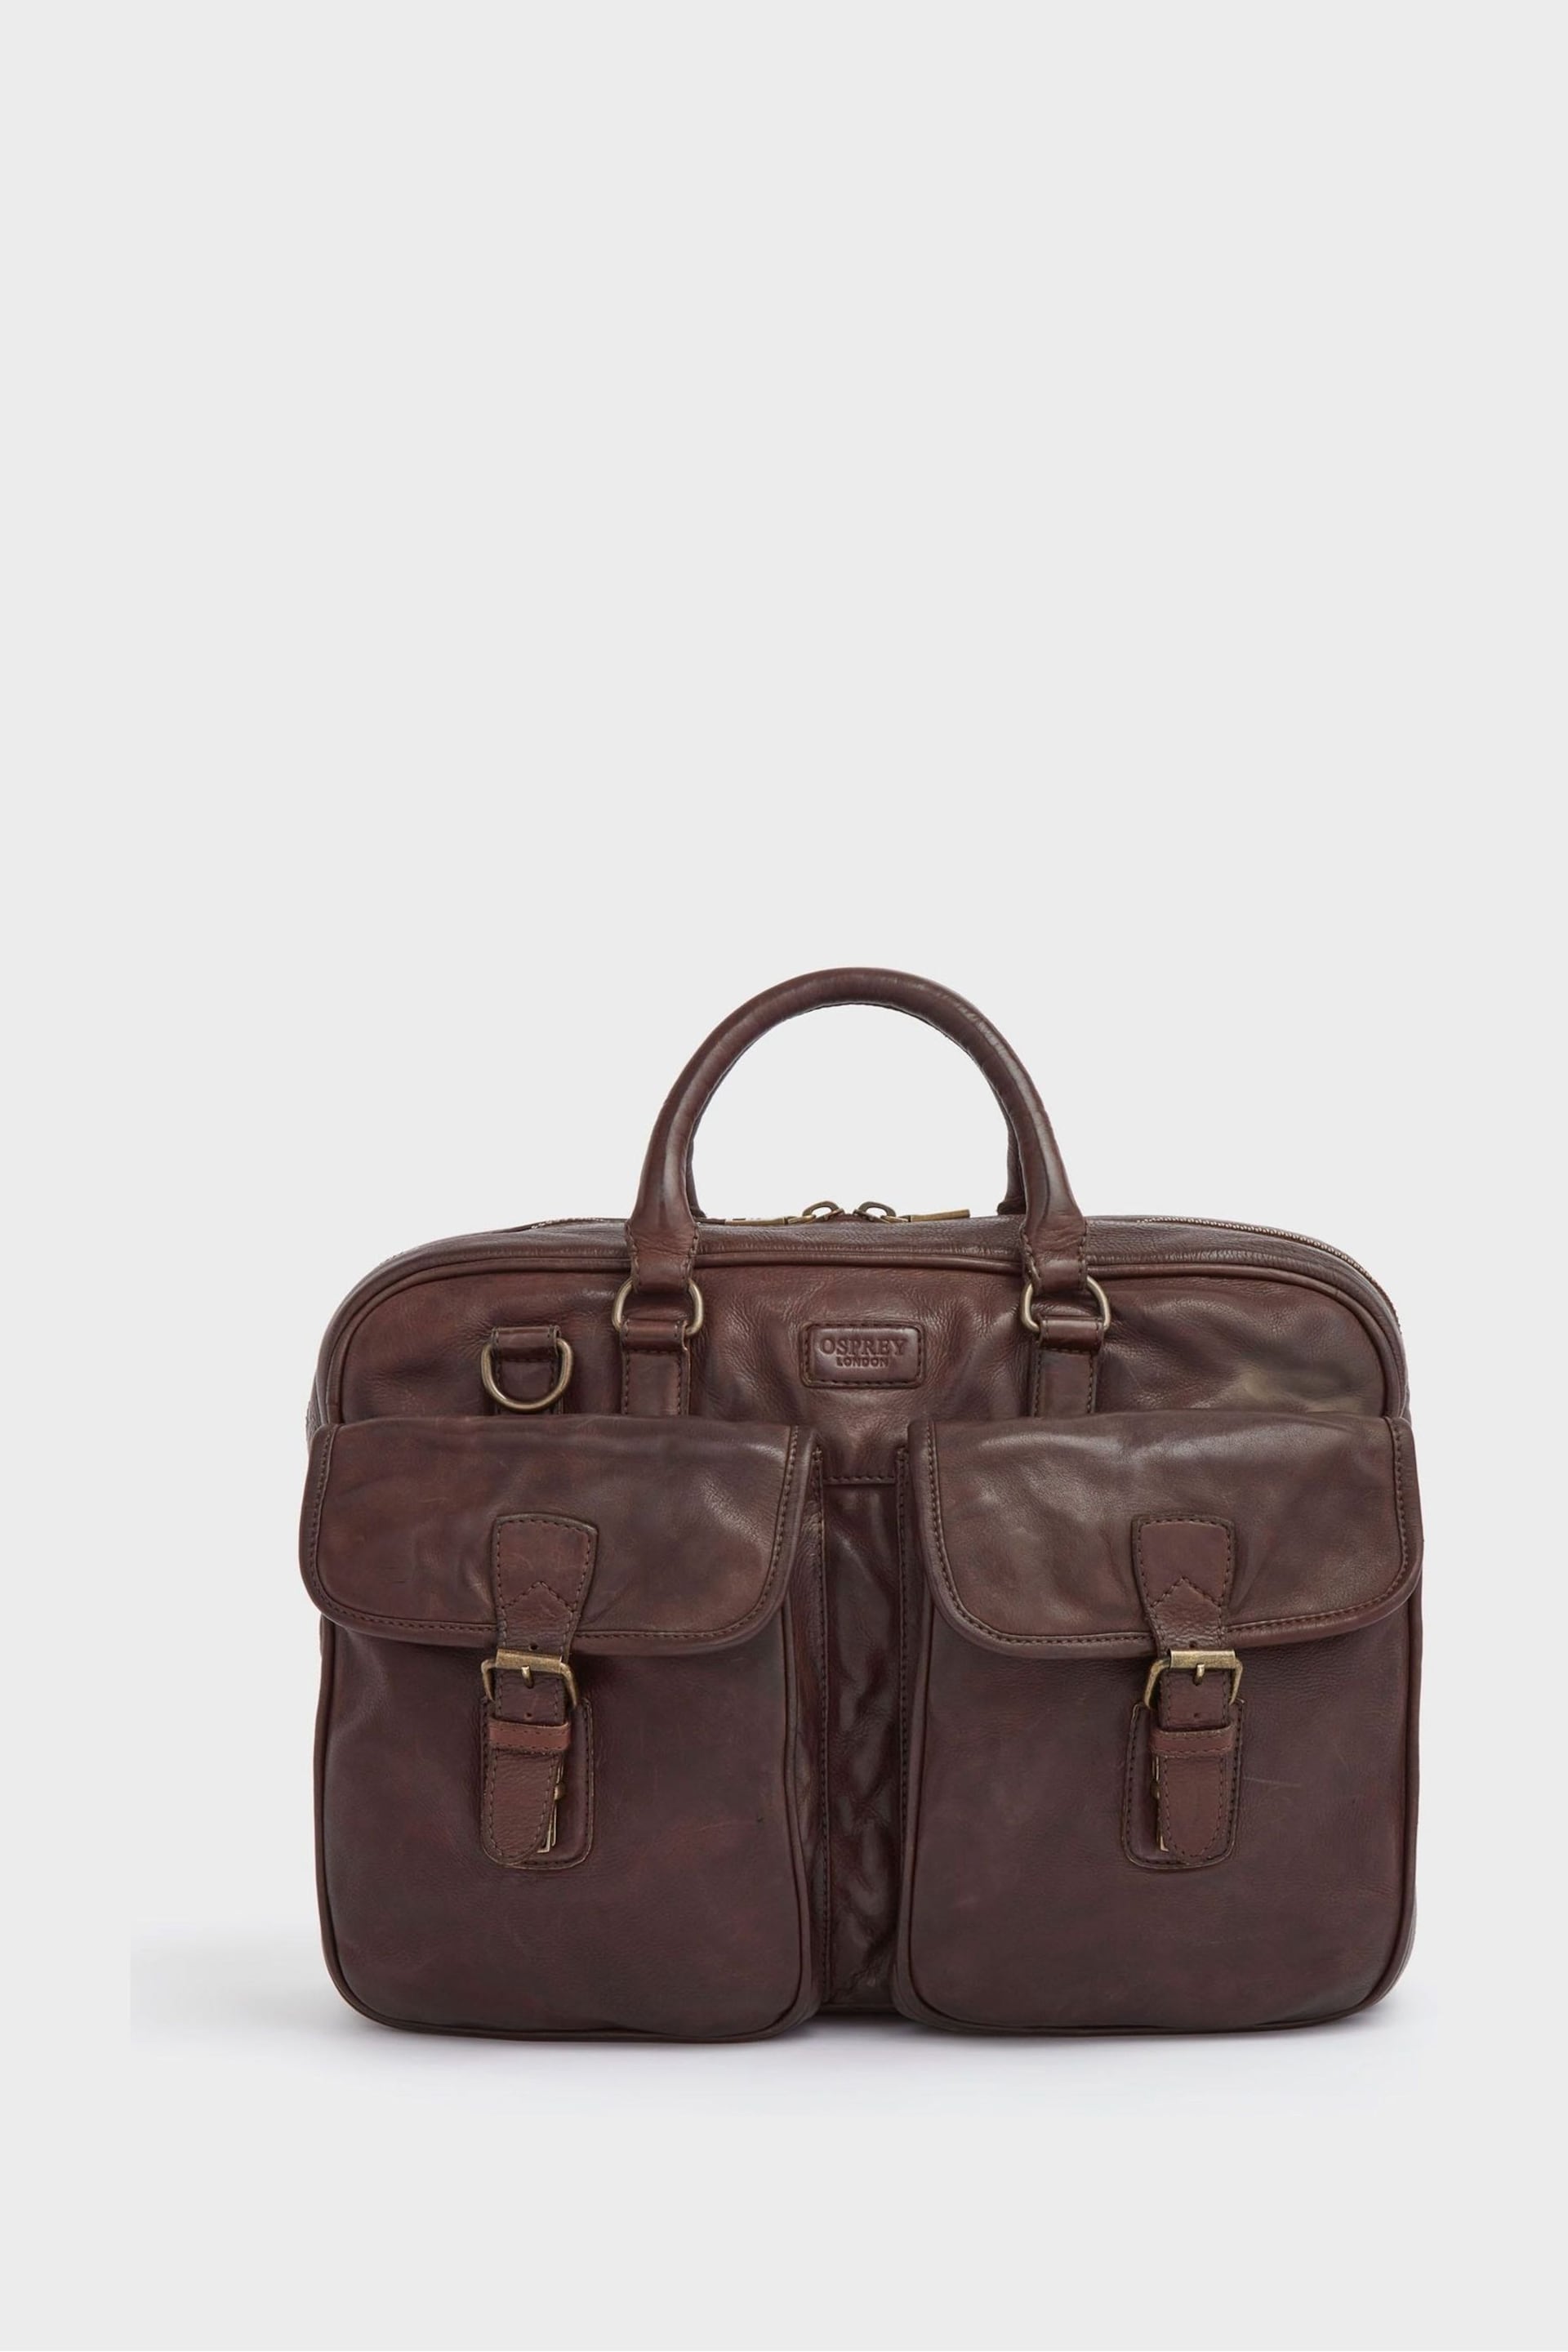 Osprey London Medium The Washed Leather Grip Brown Bag - Image 3 of 7